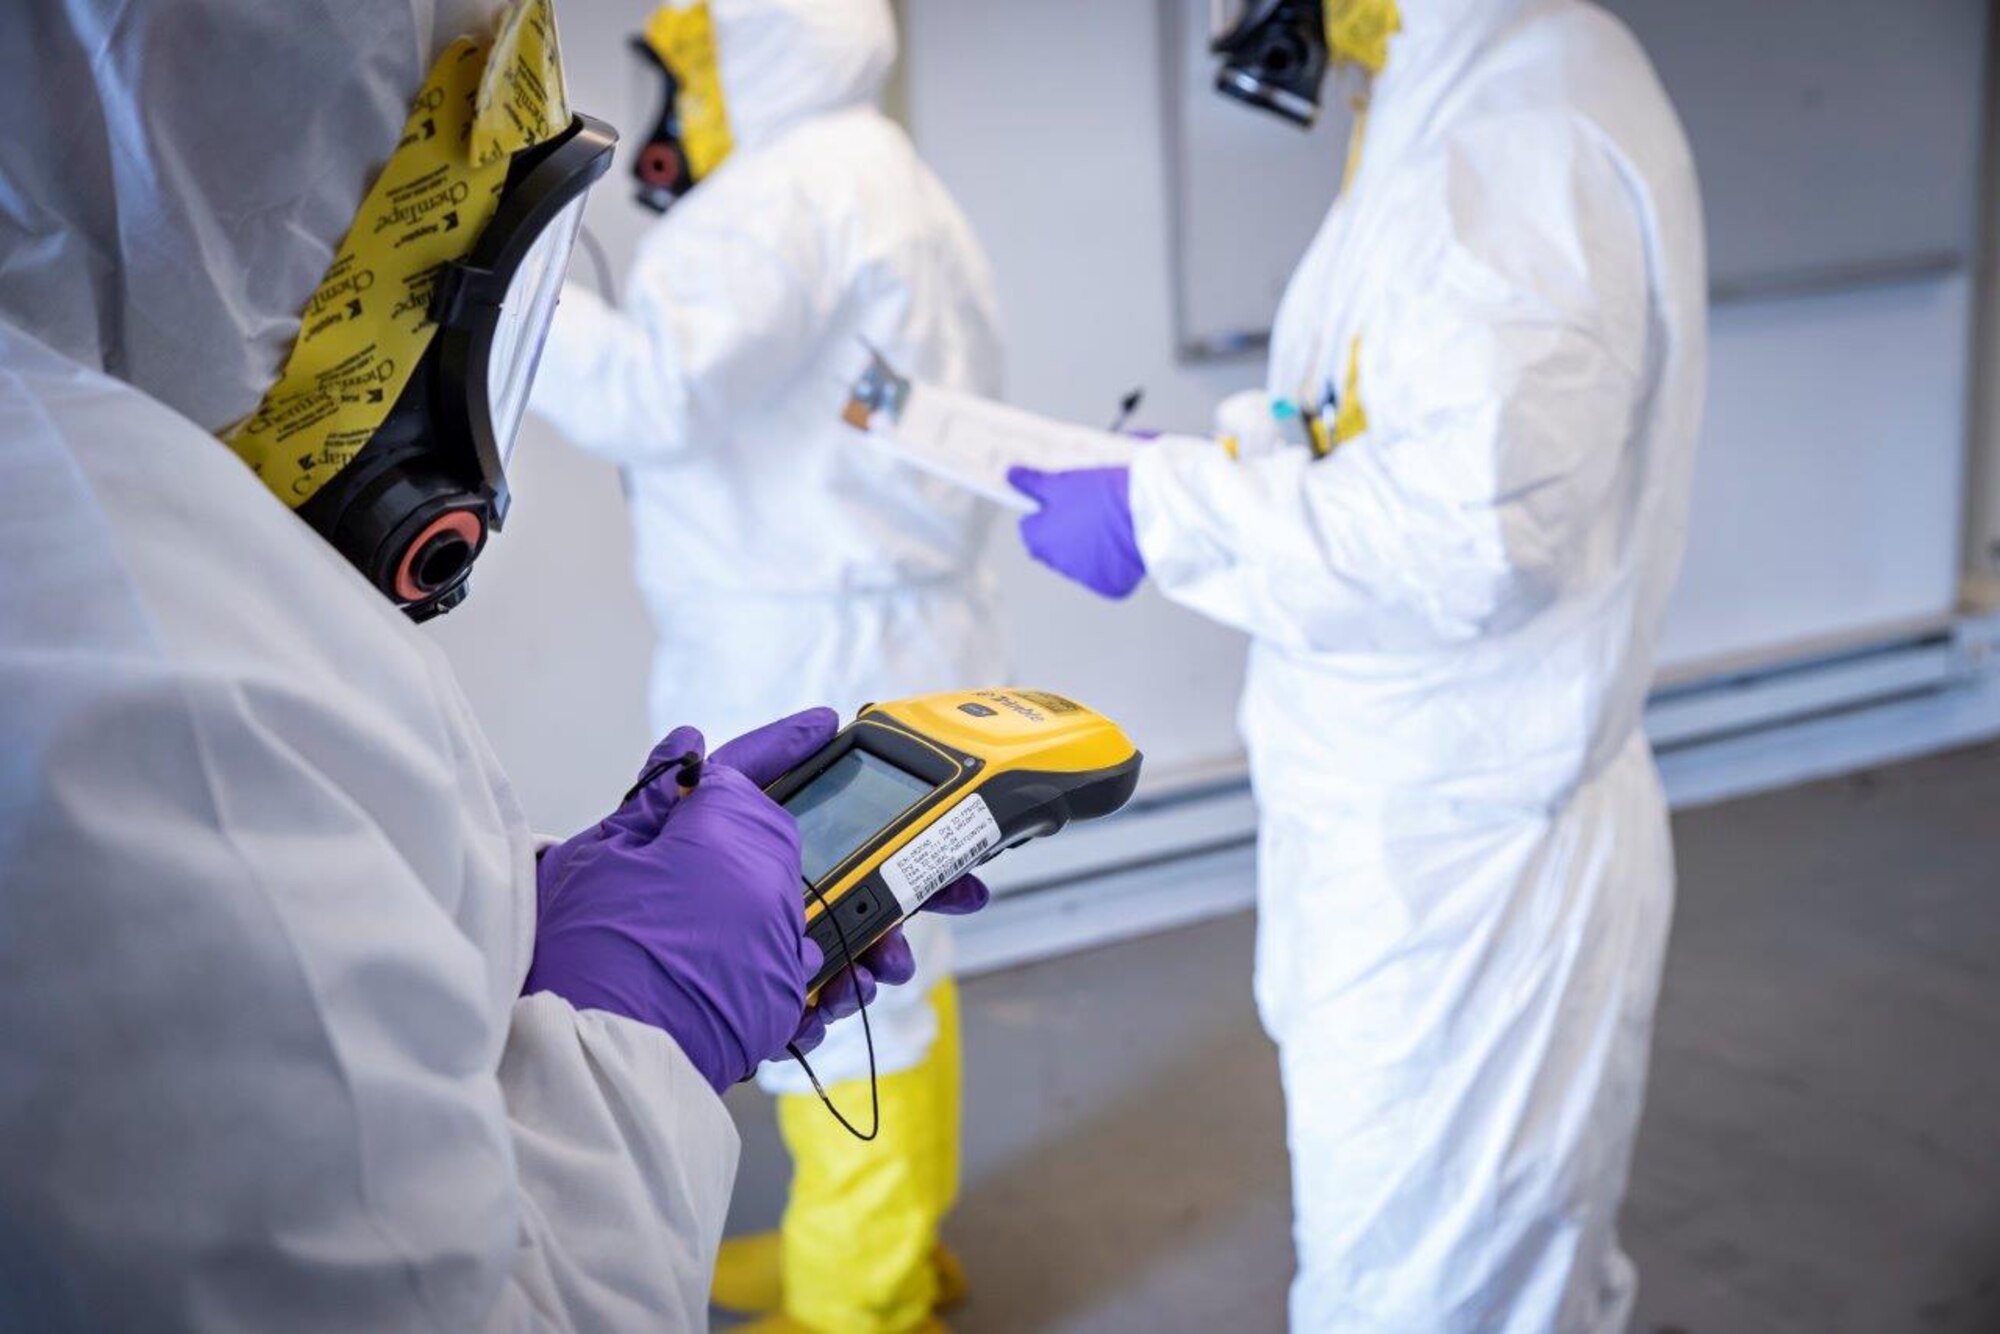 Students attending the Air Force Radiation Assessment Team (AFRAT) basic course at the USAF School of Aerospace Medicine practice procedures to measure radiological contamination during a field exercise in March 2022 at the Warfighter Training Facility at Wright-Patterson Air Force Base. (U.S. Air Force photo / Richard Eldridge)